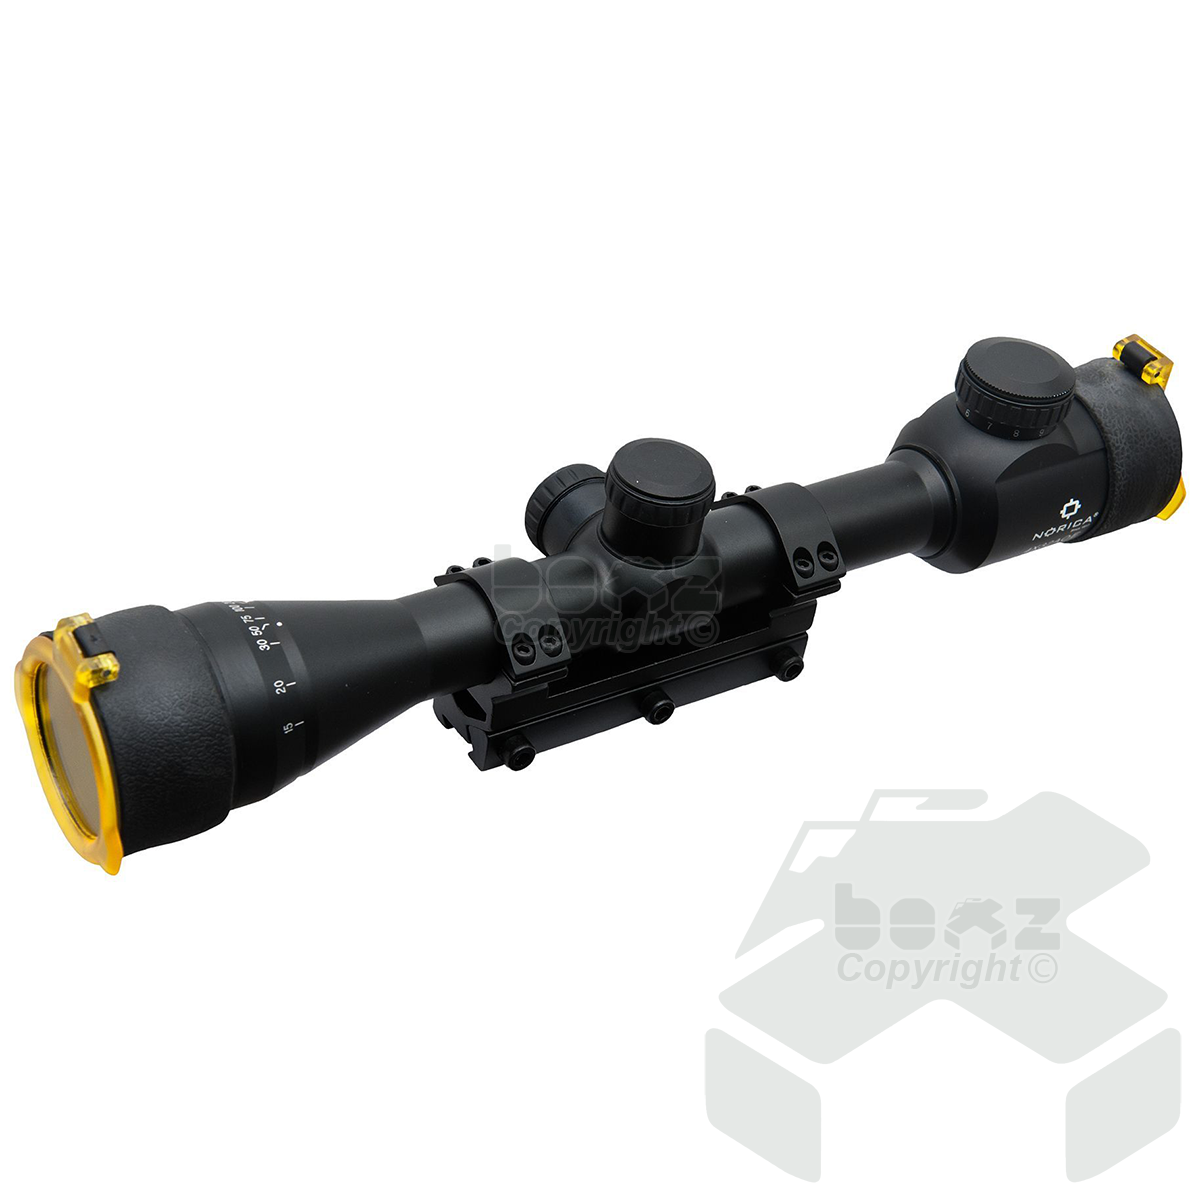 Norica Scope 4x32 AO Air King with One-Piece 3/8" Mount